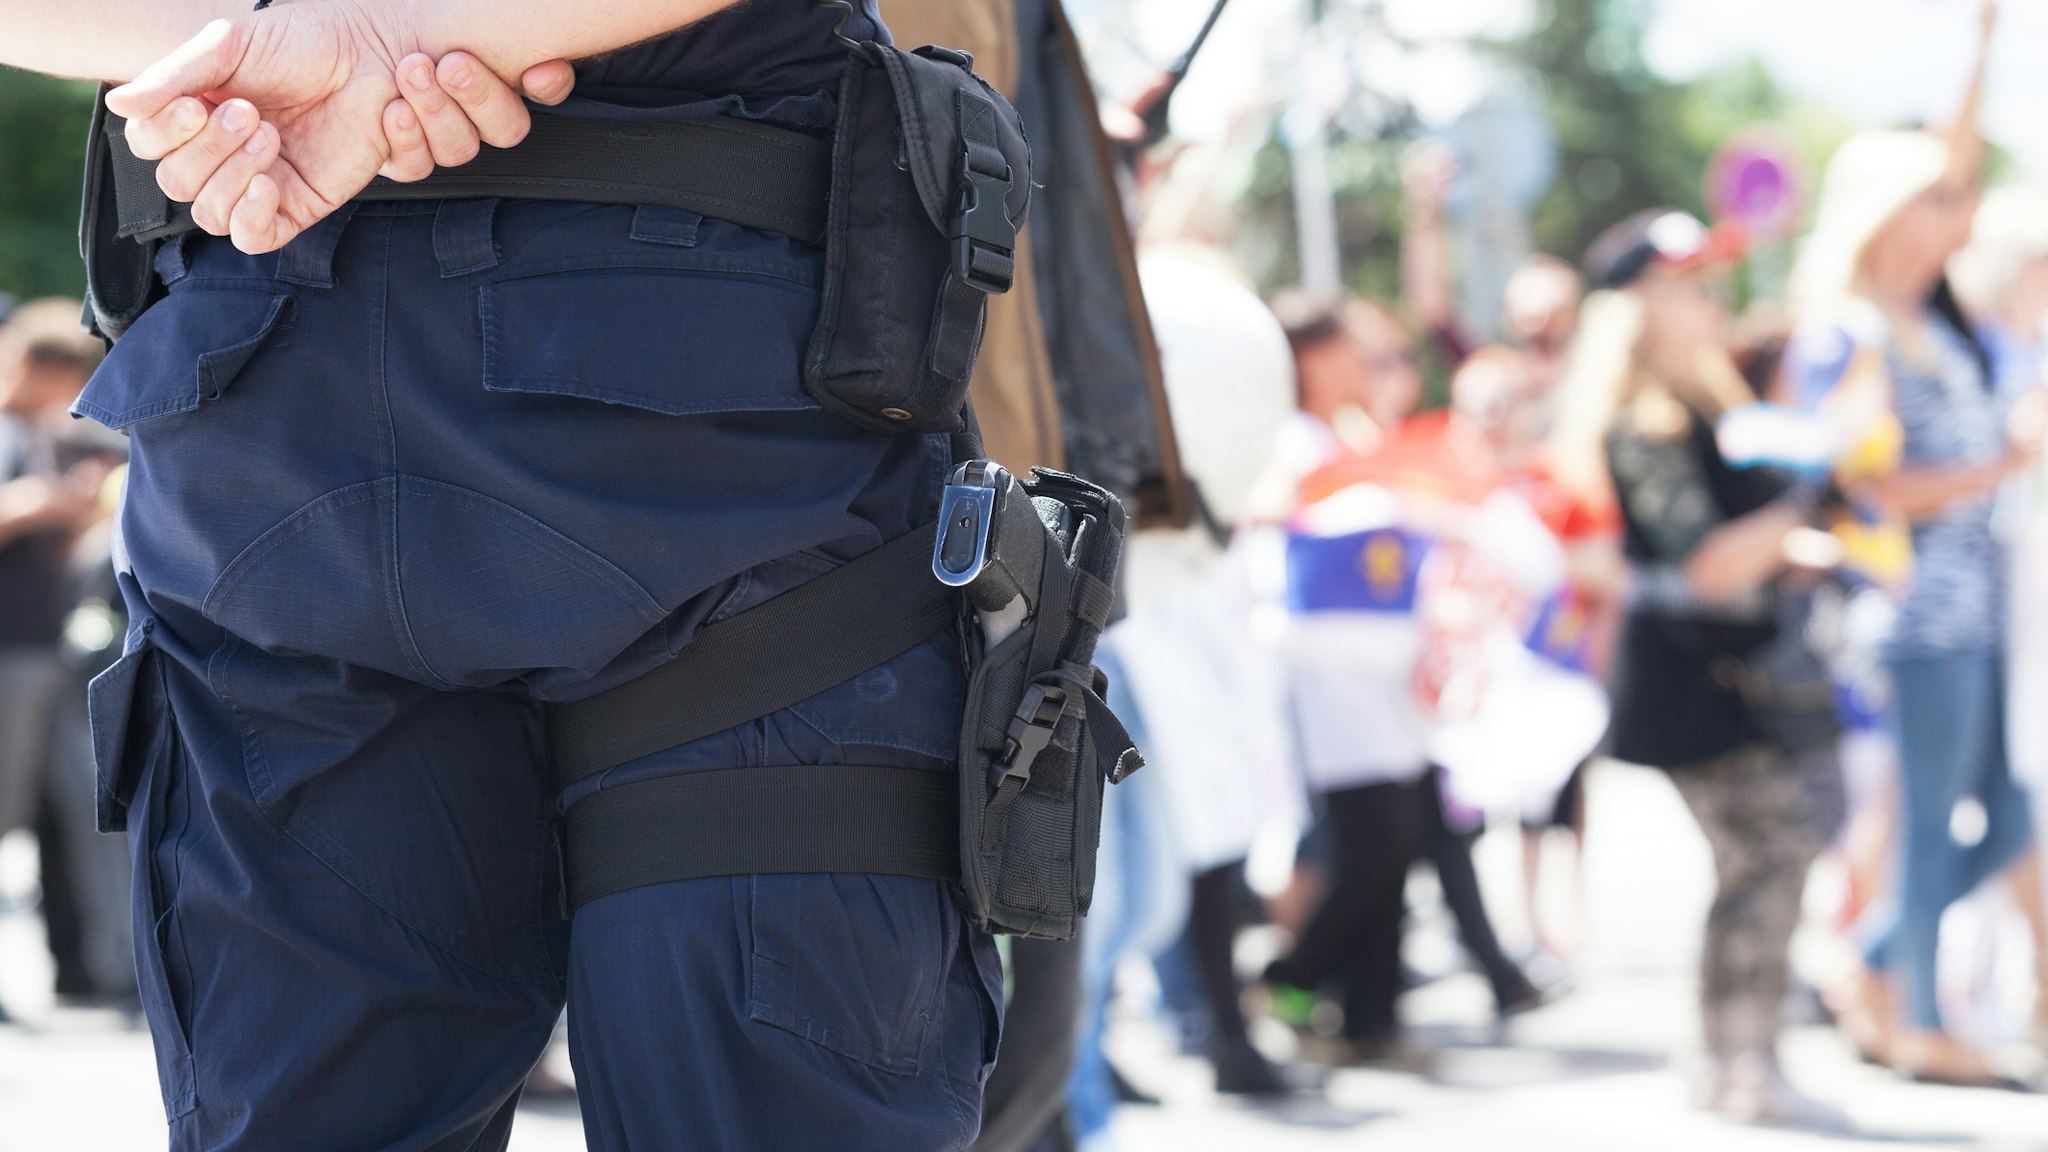 Midsection Of Police Force Against Crowd During Protest - stock photo